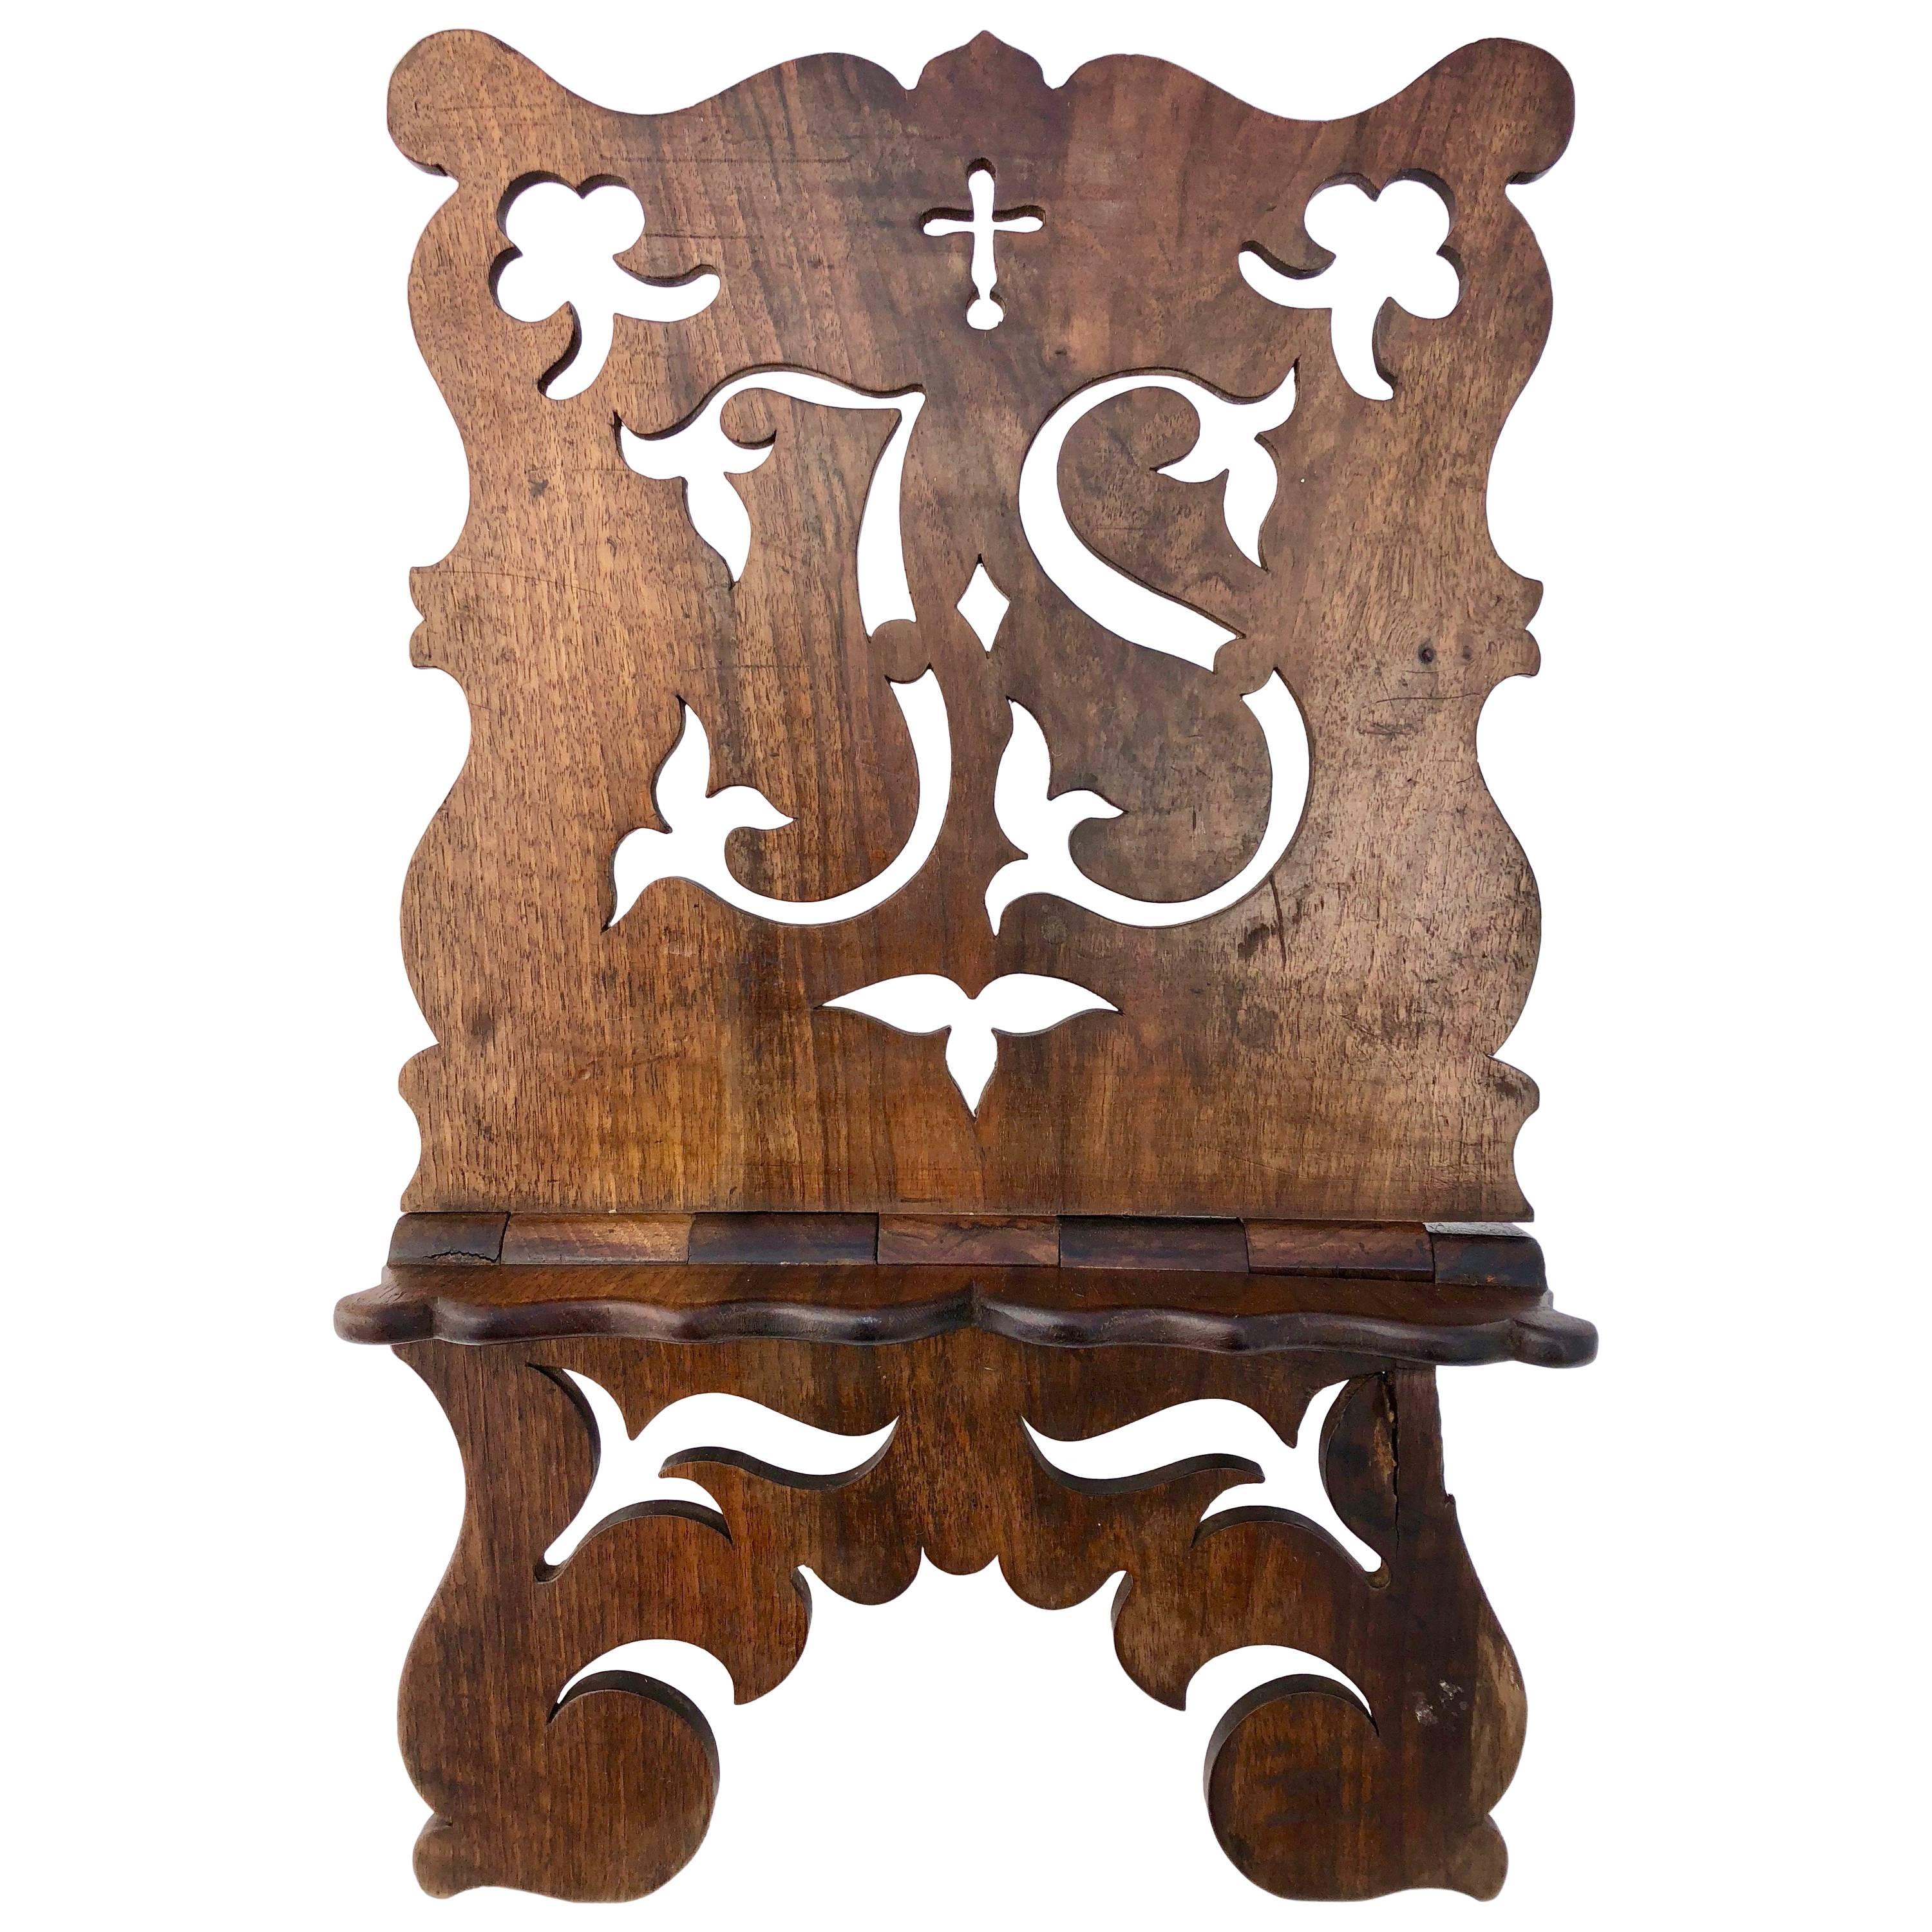 French Foldable Hand-Carved Wood Easel with Cross and Initials ‘JS’, Early 1900s